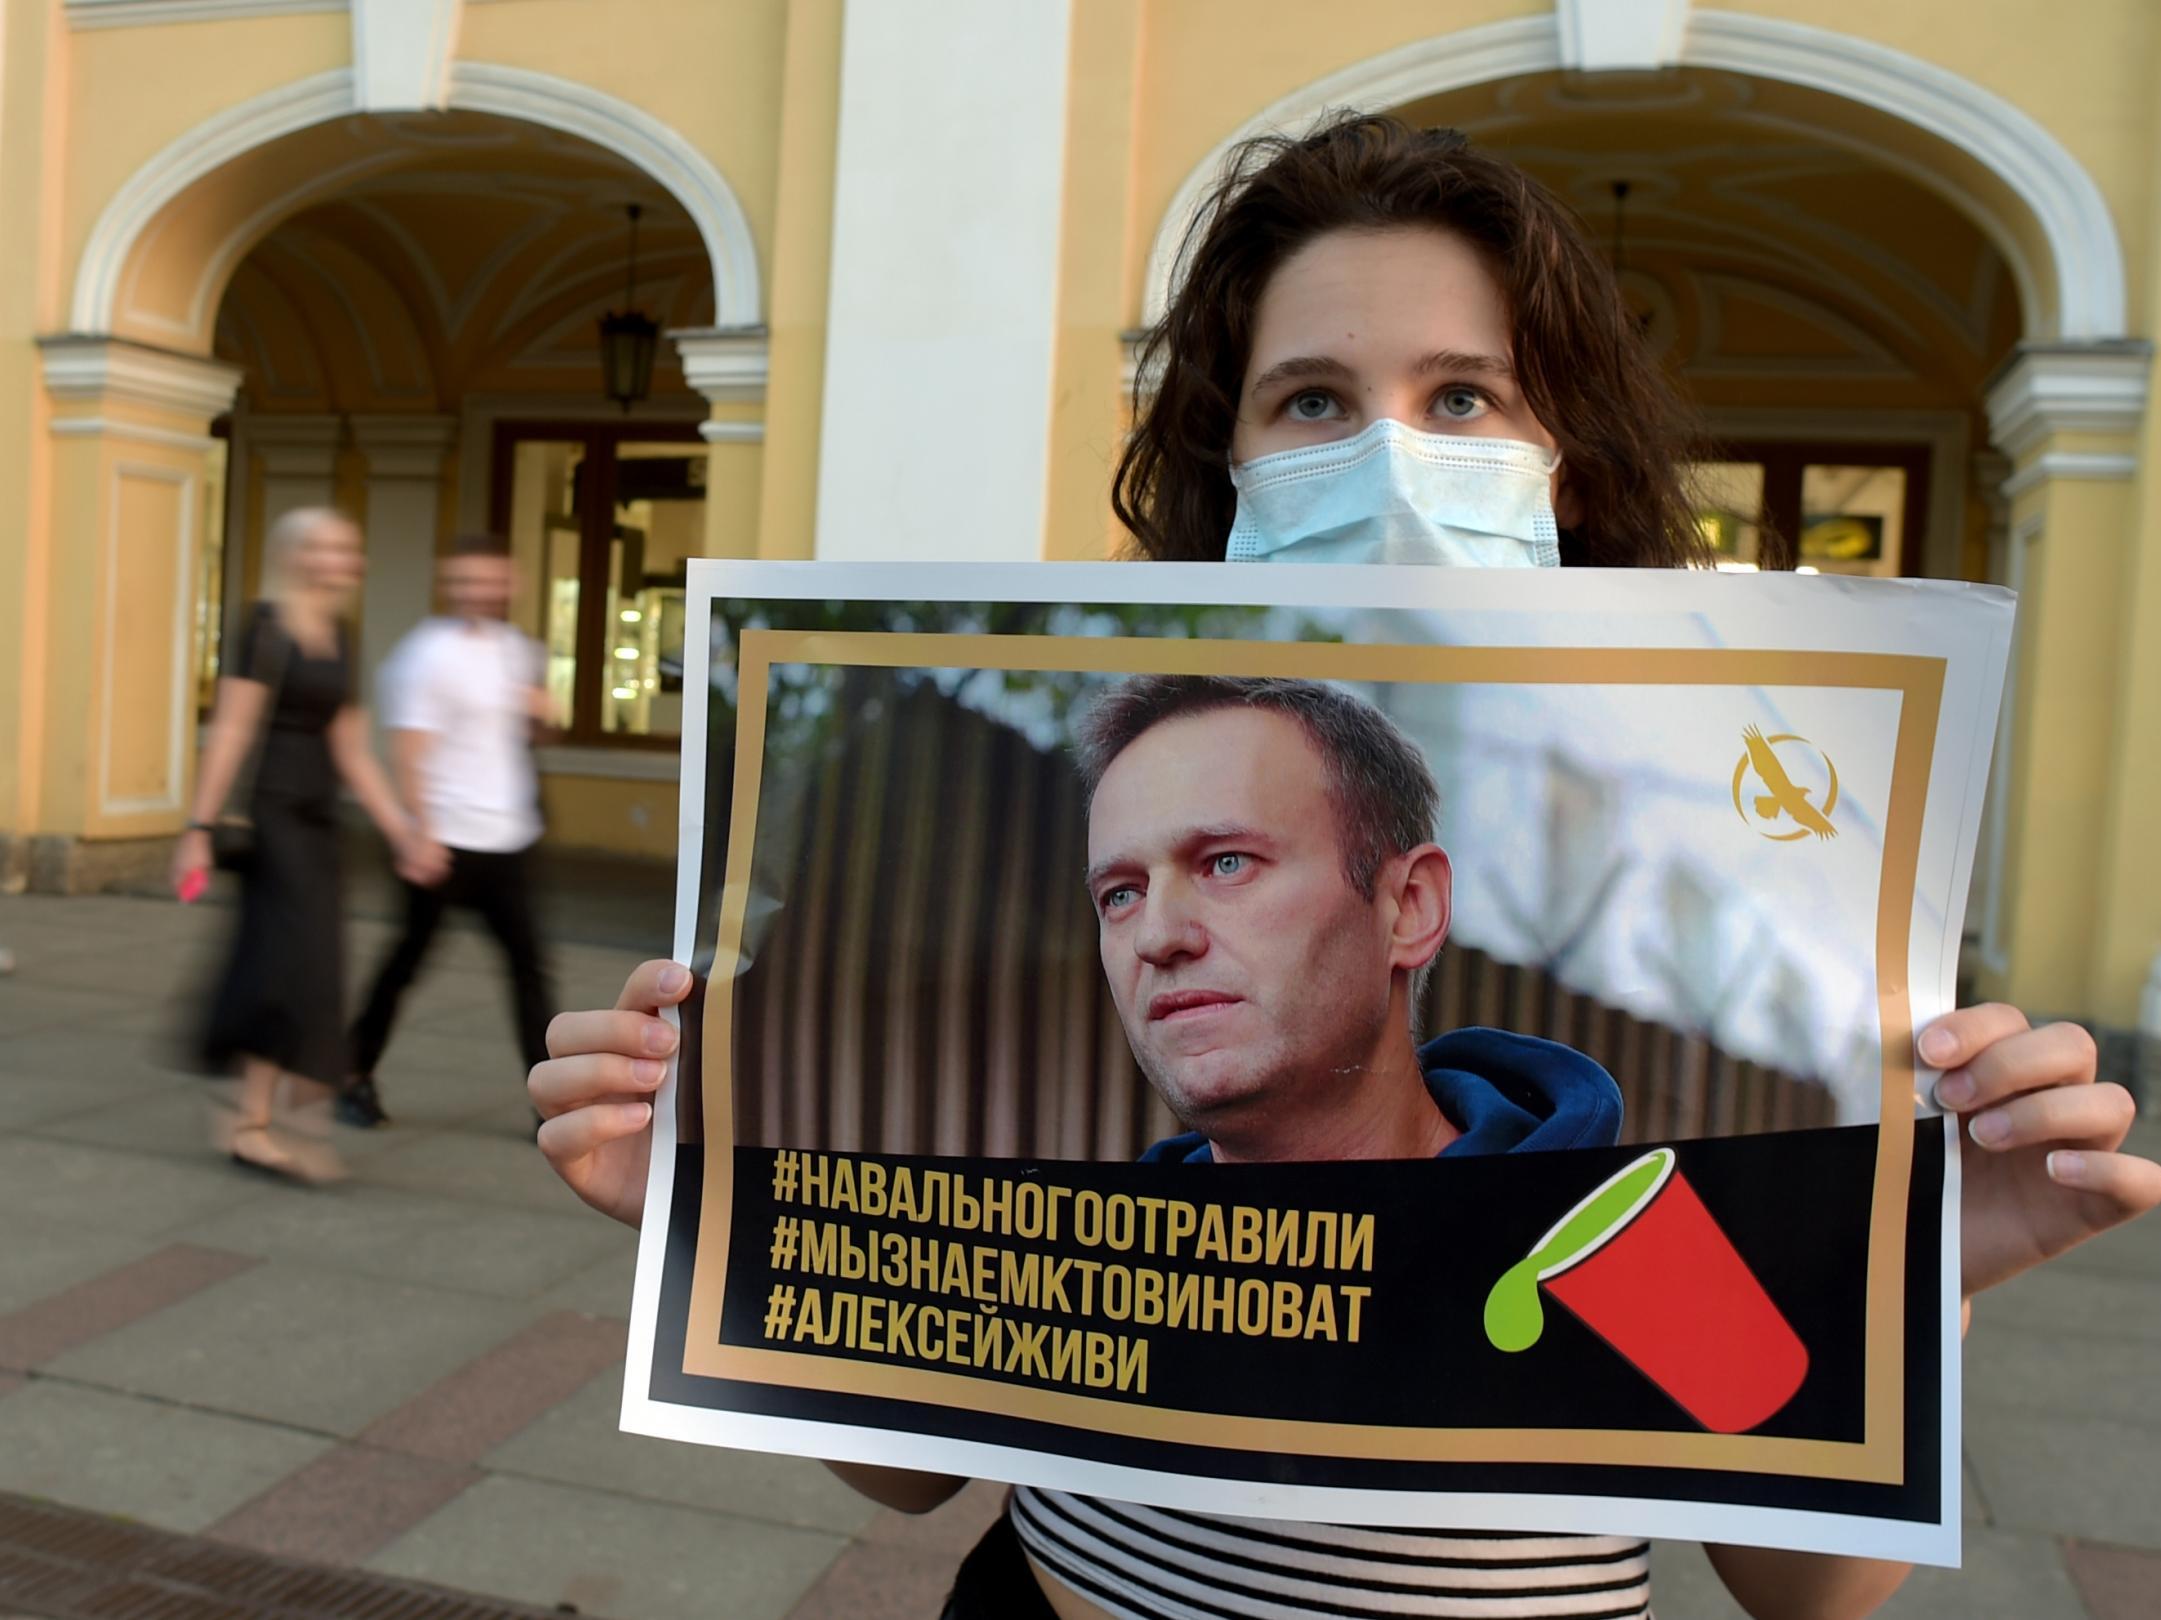 A woman holding a placard with an image of Navalny expresses support for the opposition leader